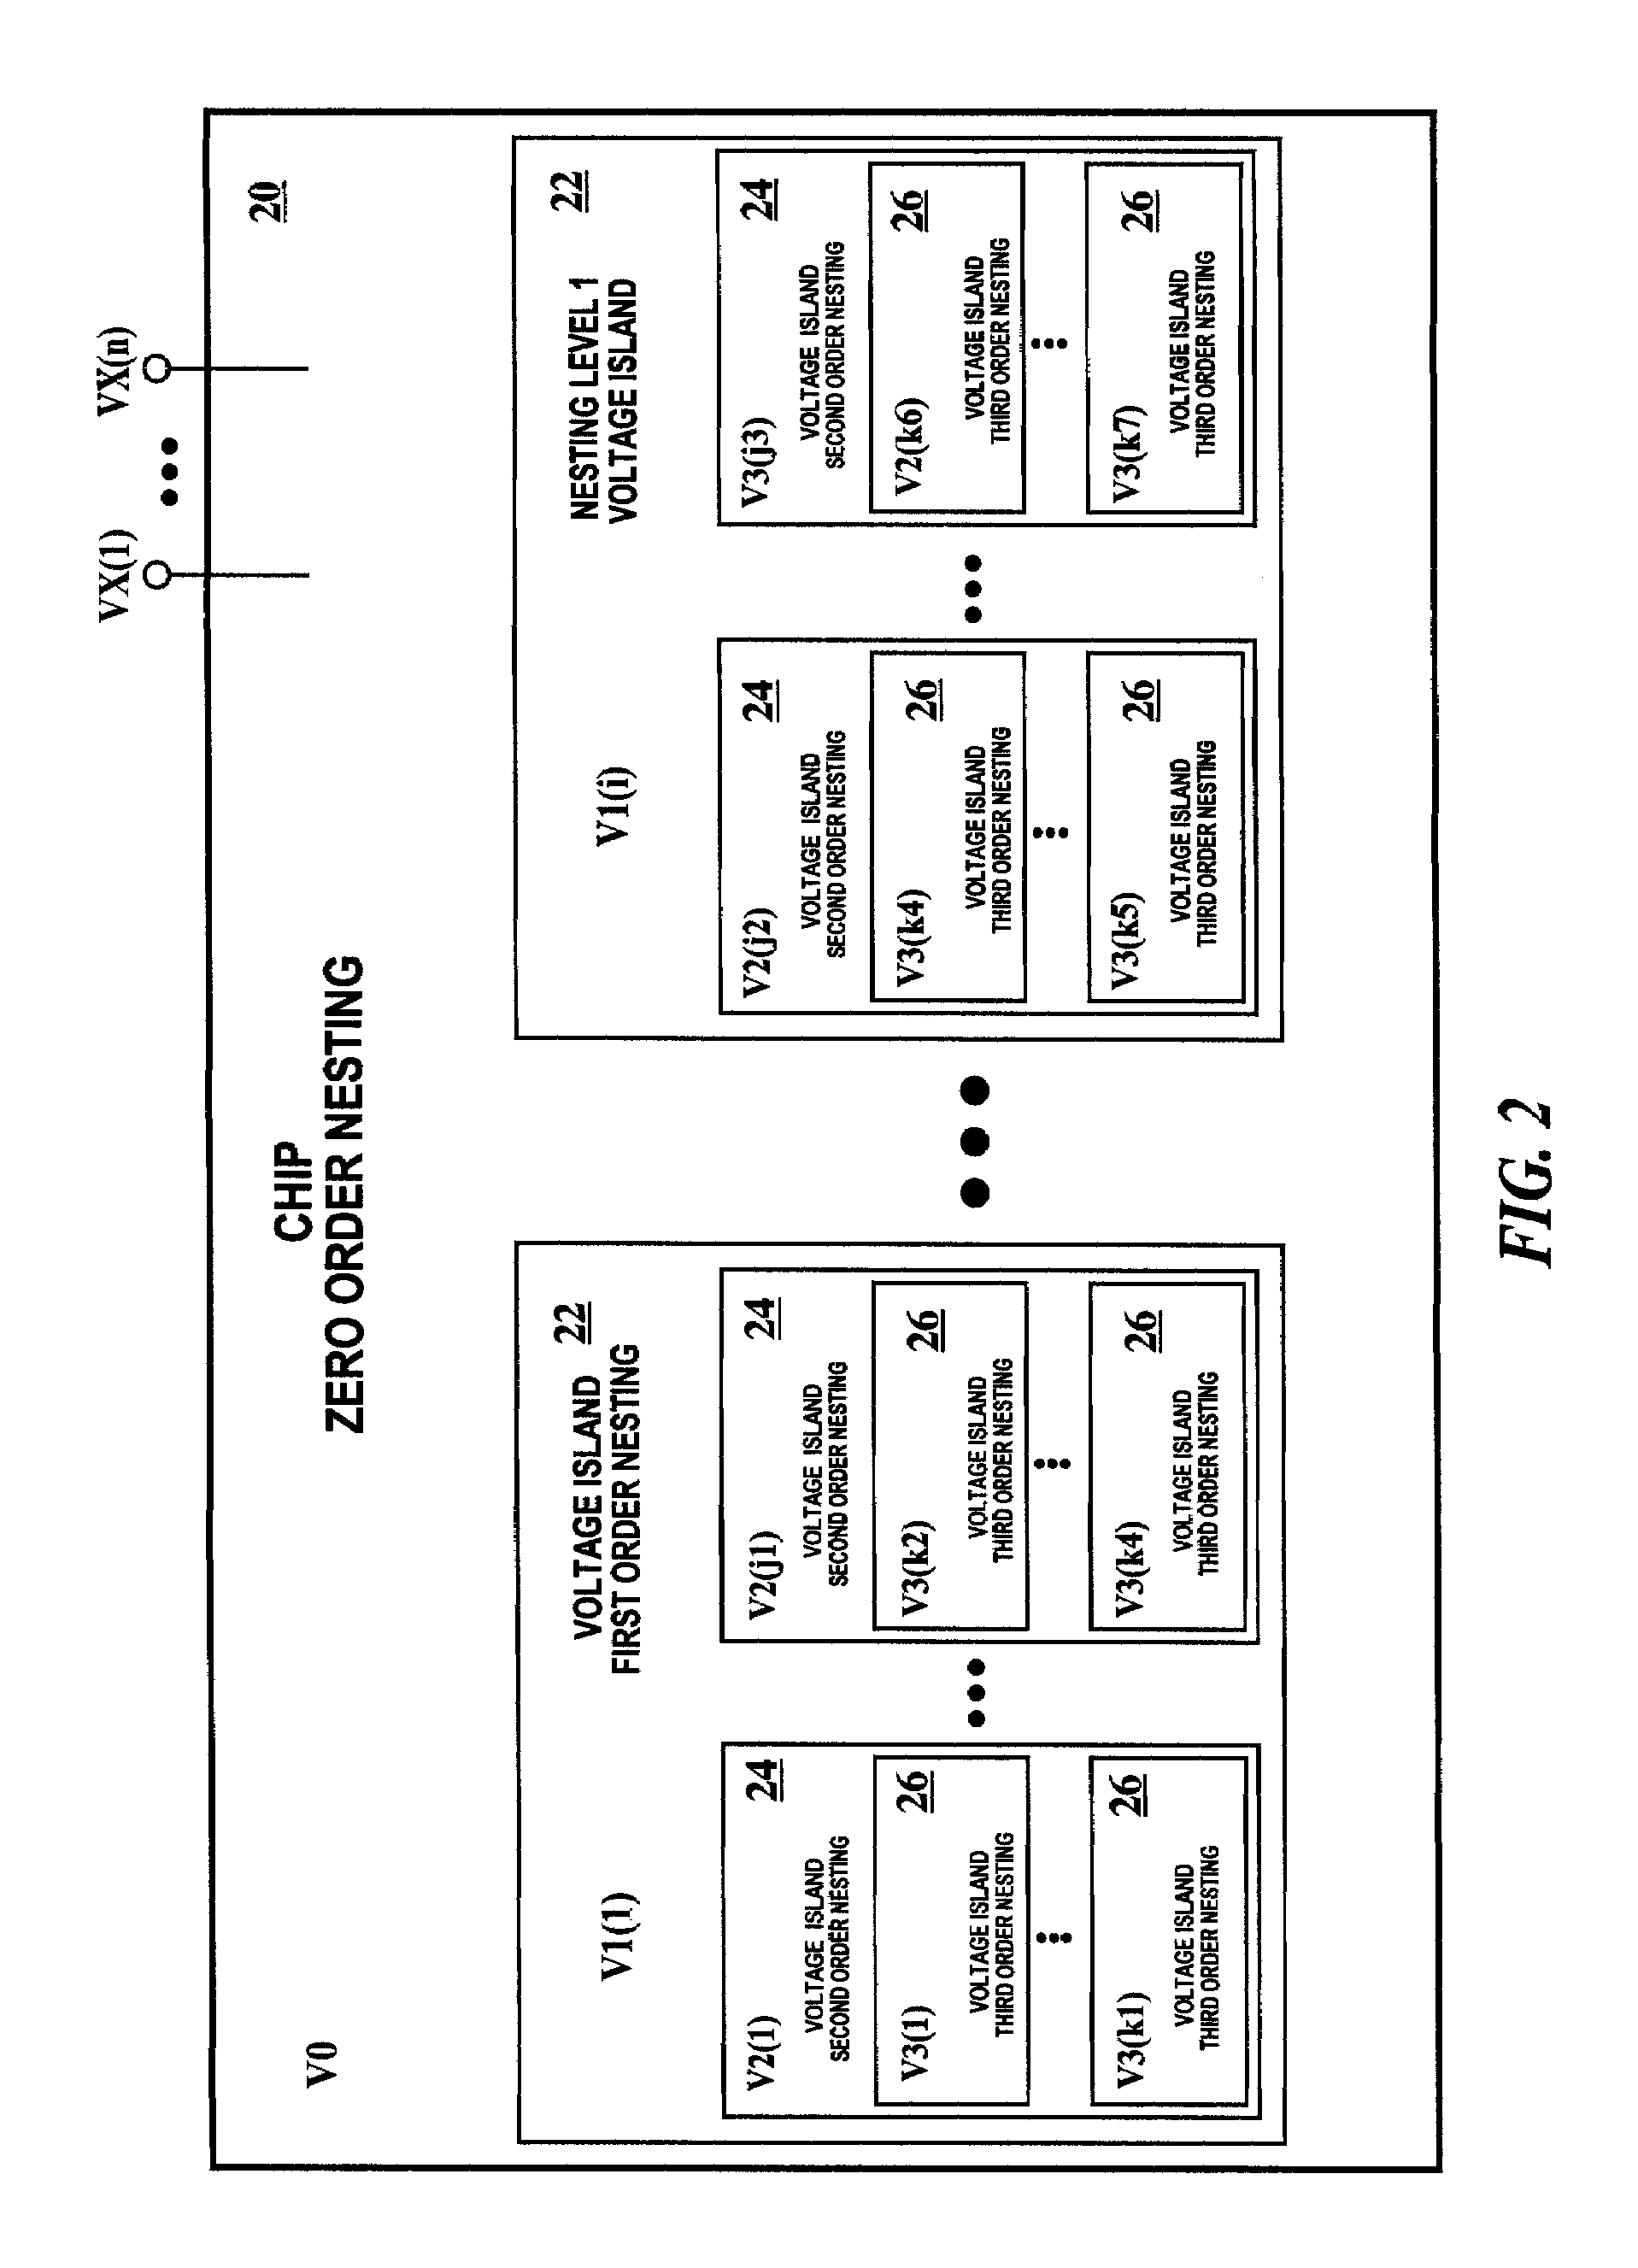 Nested voltage island architecture